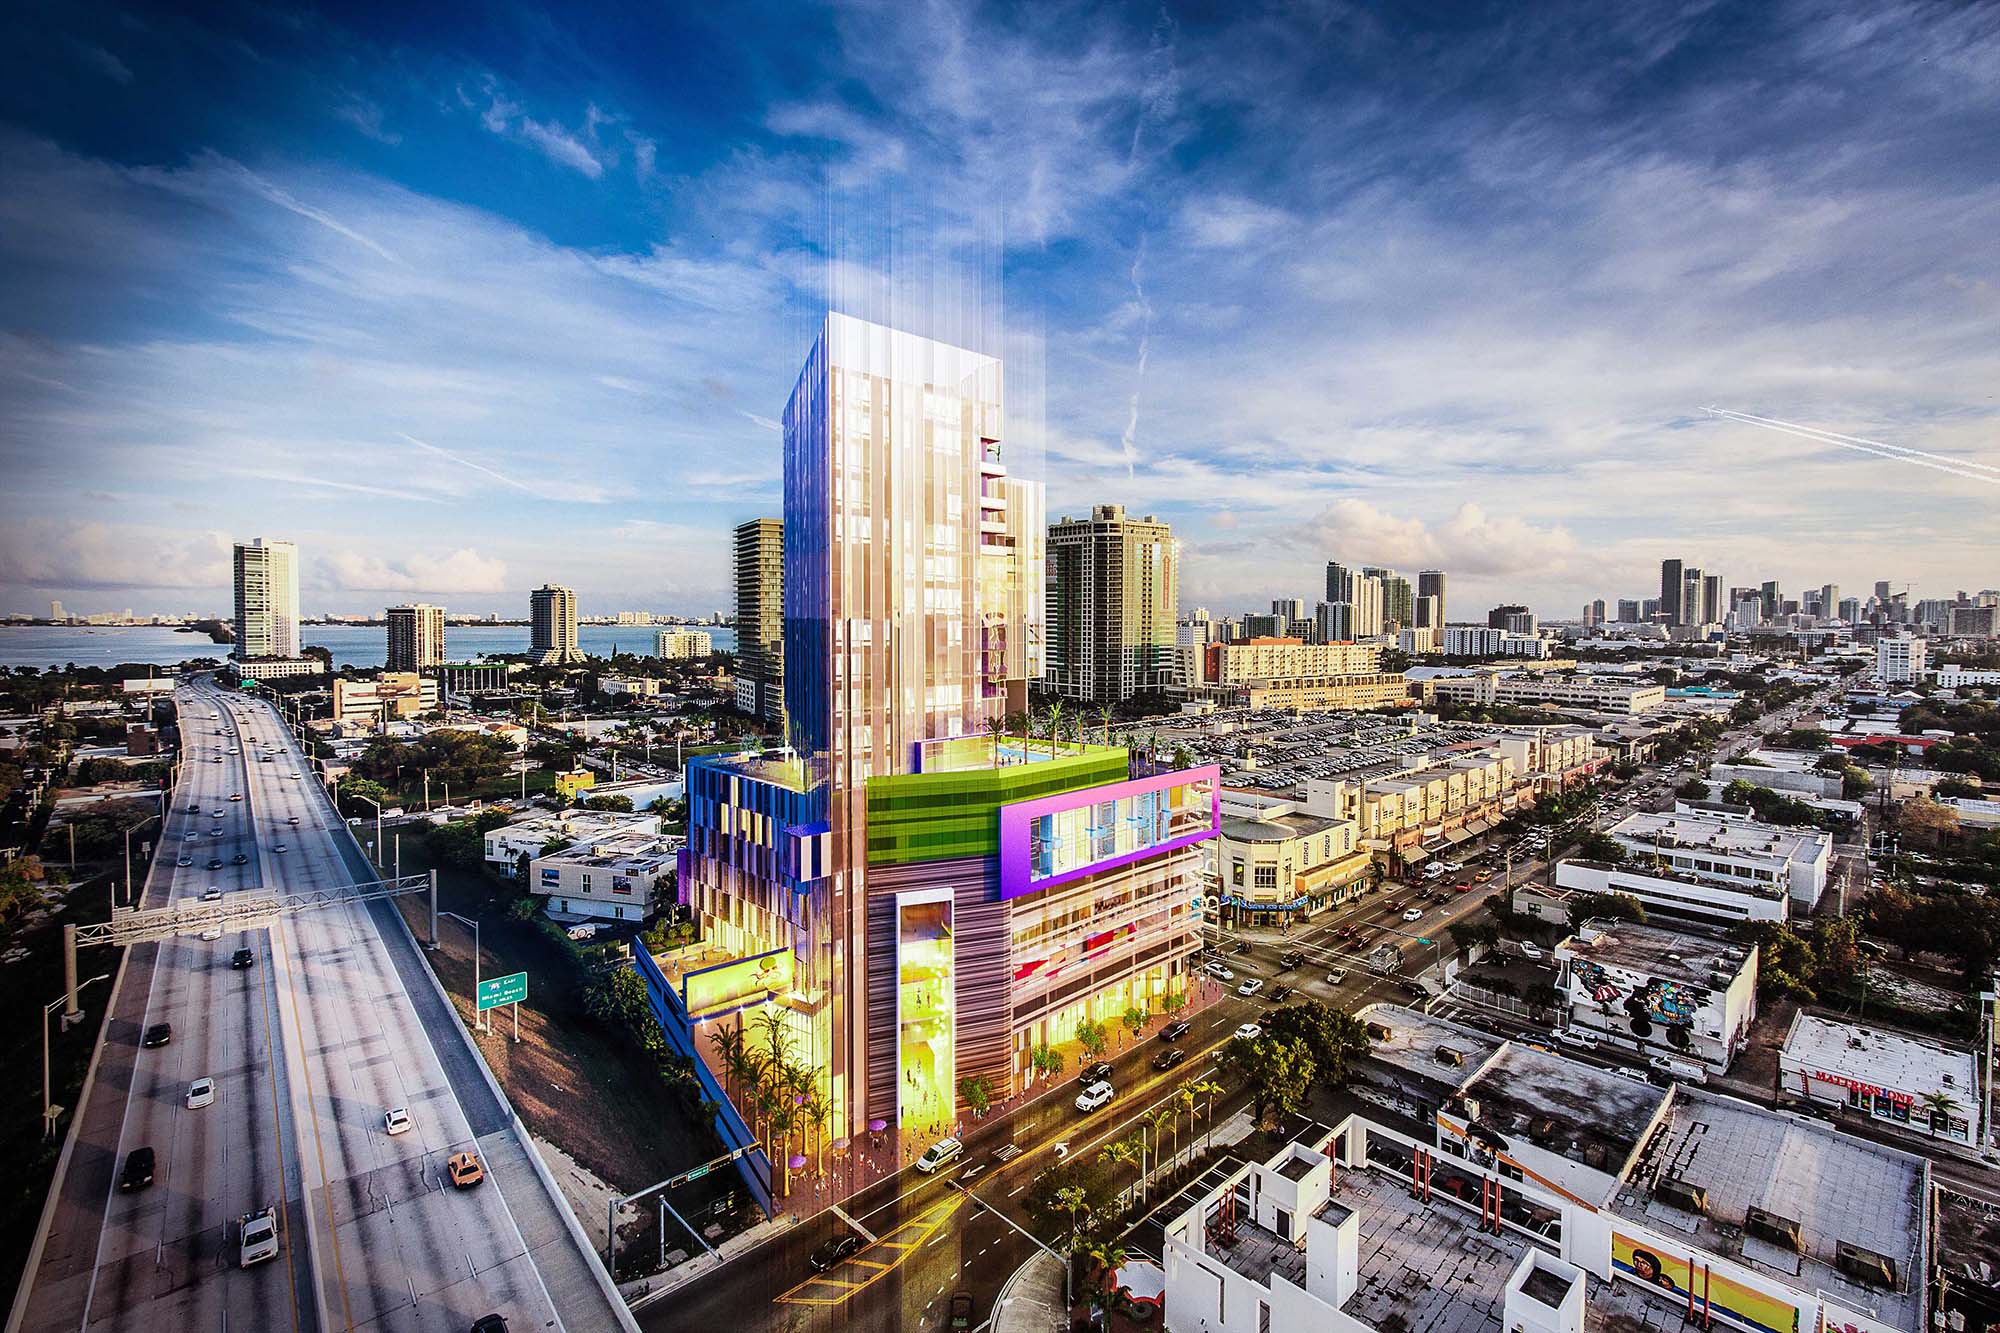 Rare full city block development opportunity in Miami’s Design District comes to market in bankruptcy sale led by Avison Young